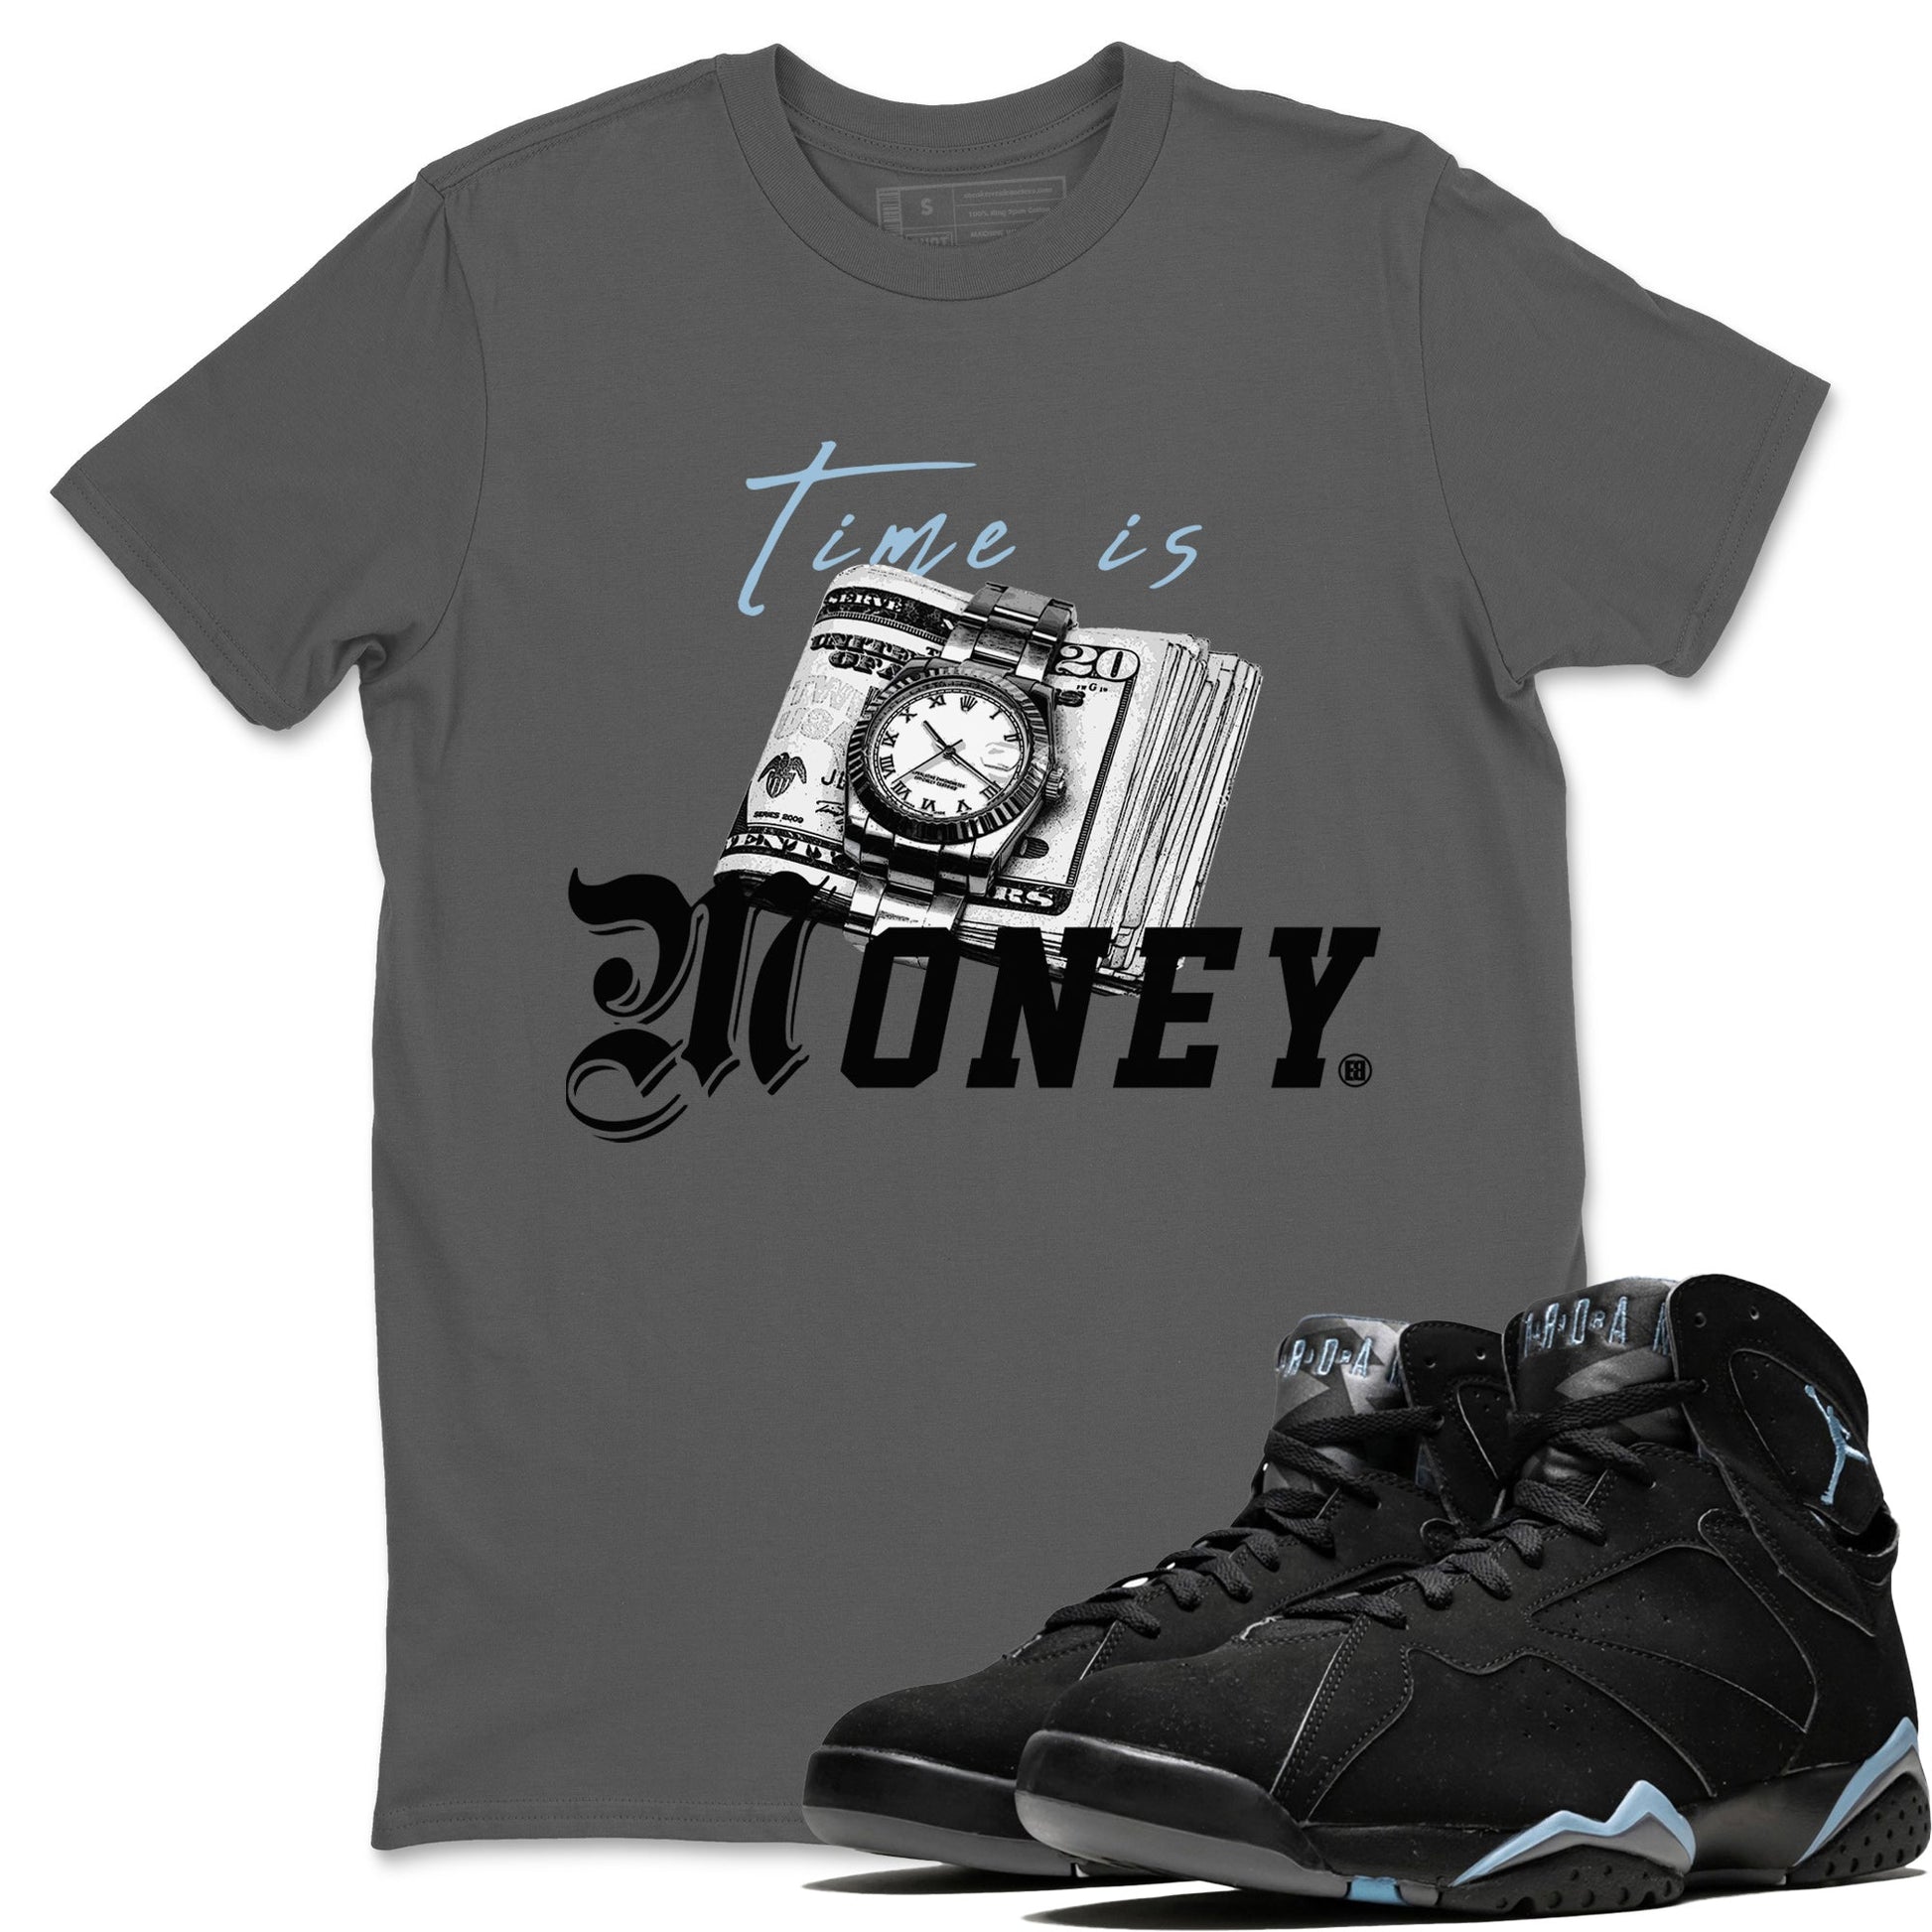 Air Jordan 7 Chambray Sneaker Match Tees Time Is Money Sneaker T-Shirt AJ7 Chambray Sneaker Release Tees Unisex Shirts Cool Grey 1